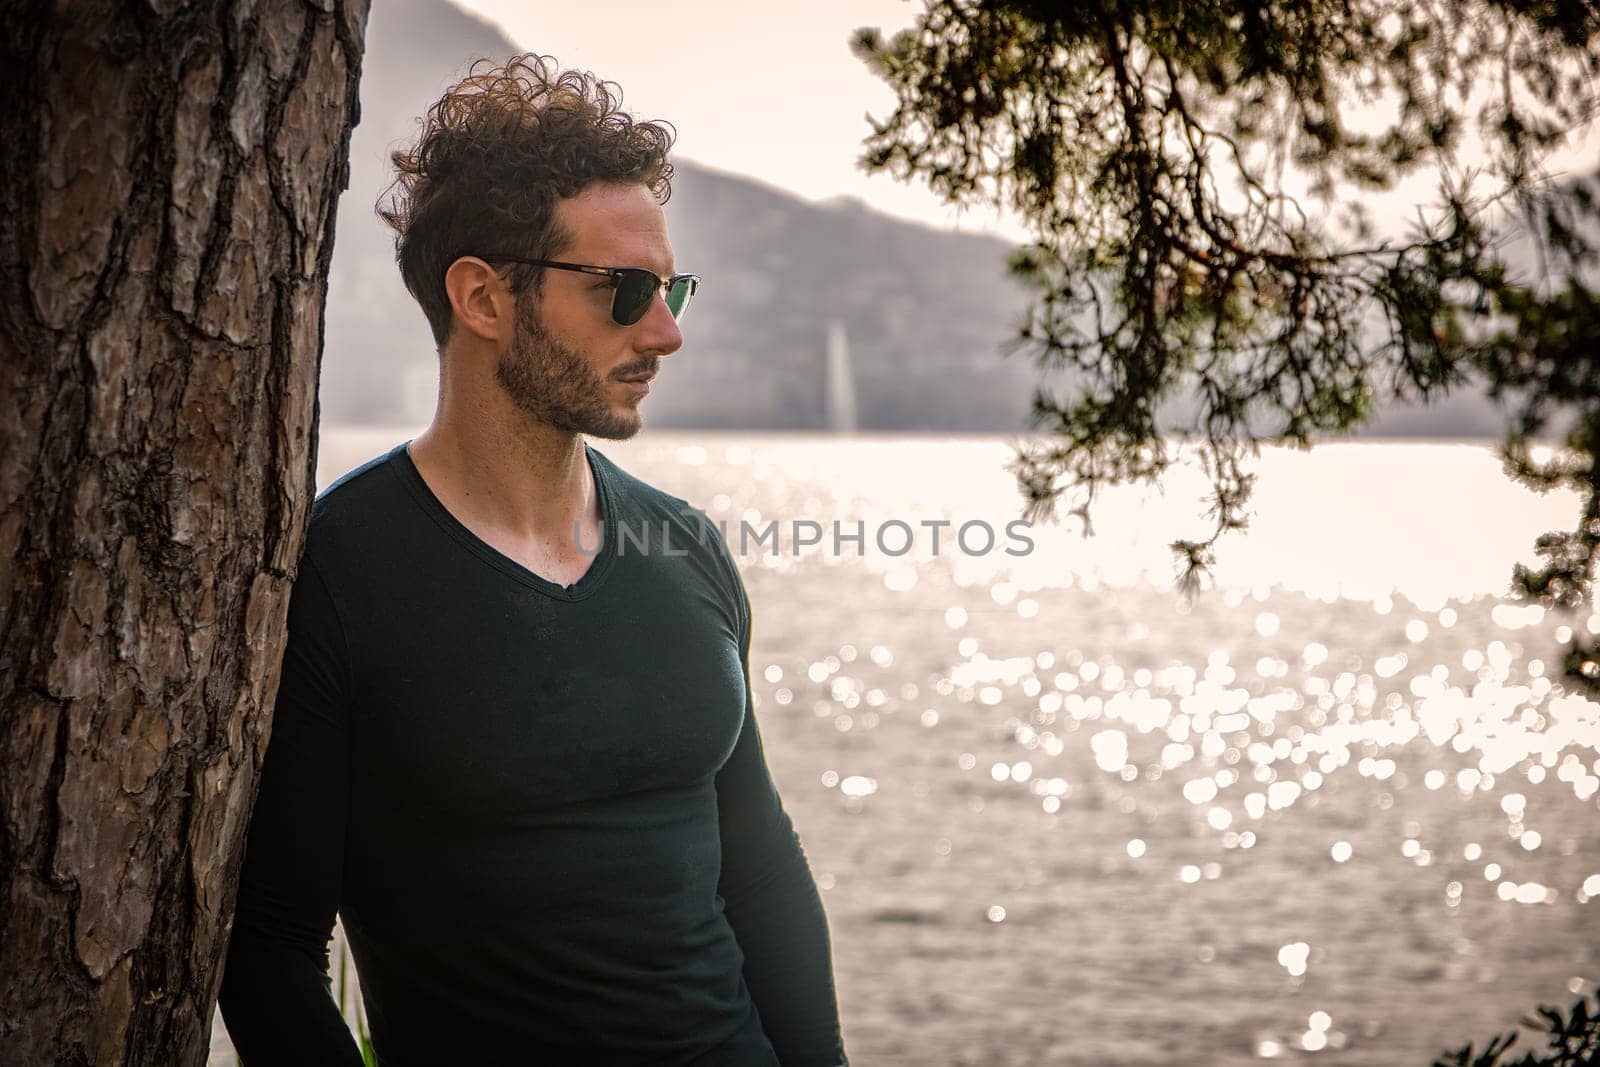 A Serene Encounter: A Handsome Man Contemplating Nature's Beauty by the Water's Edge by artofphoto